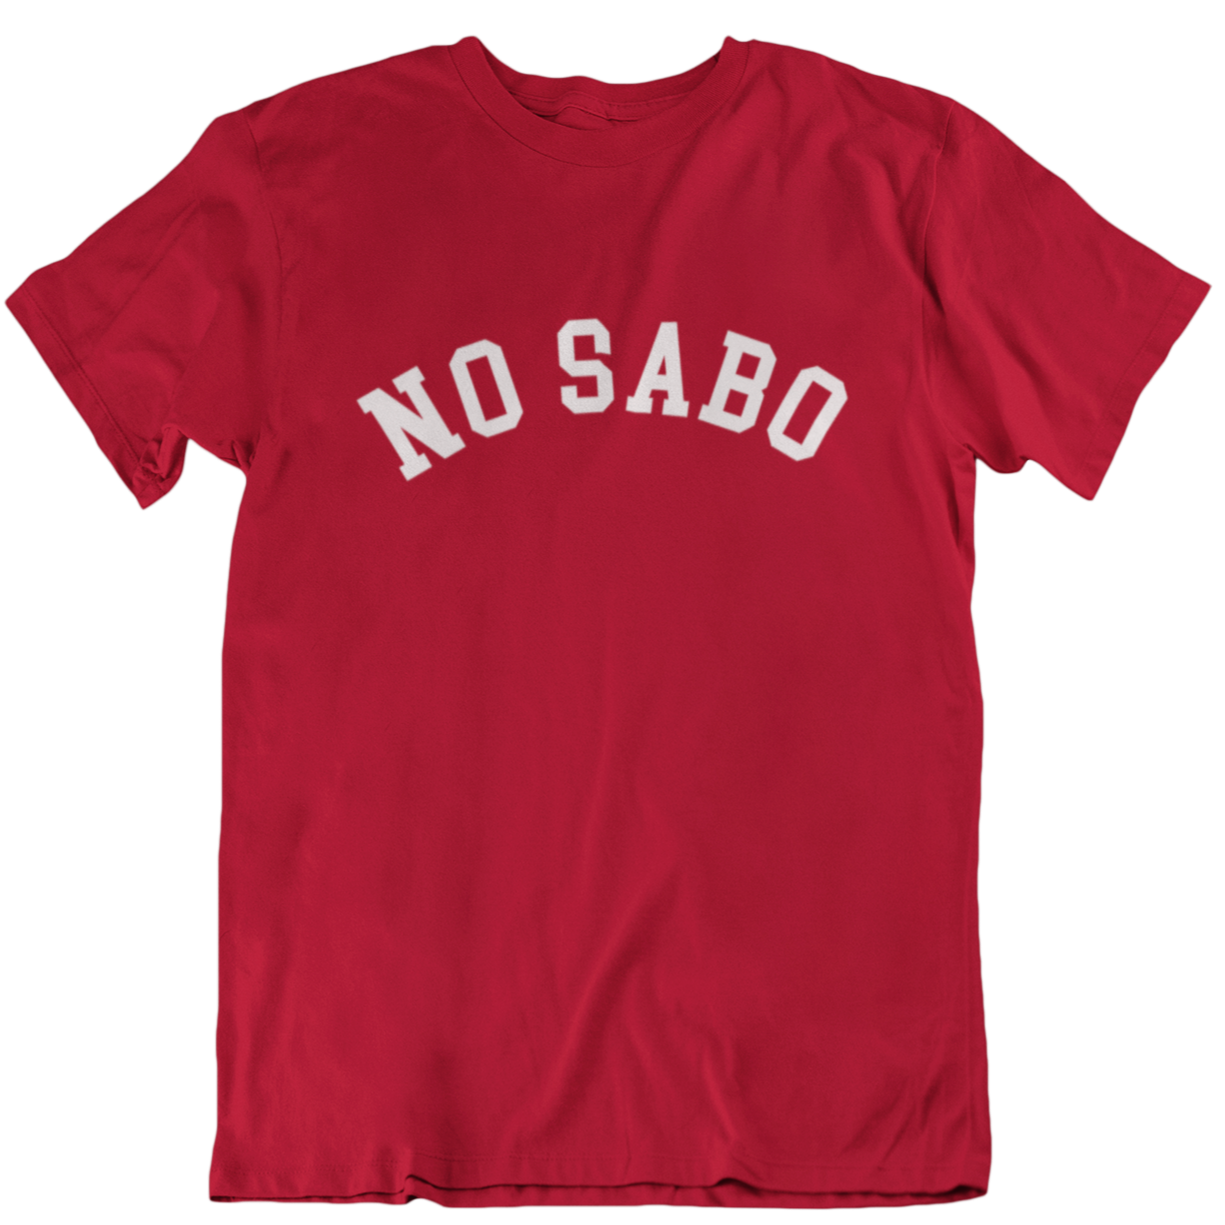 funny red t-shirt for latinos and chicanos.  in bold white lettering the shirt states "no sabo" in honor of no sabo kids